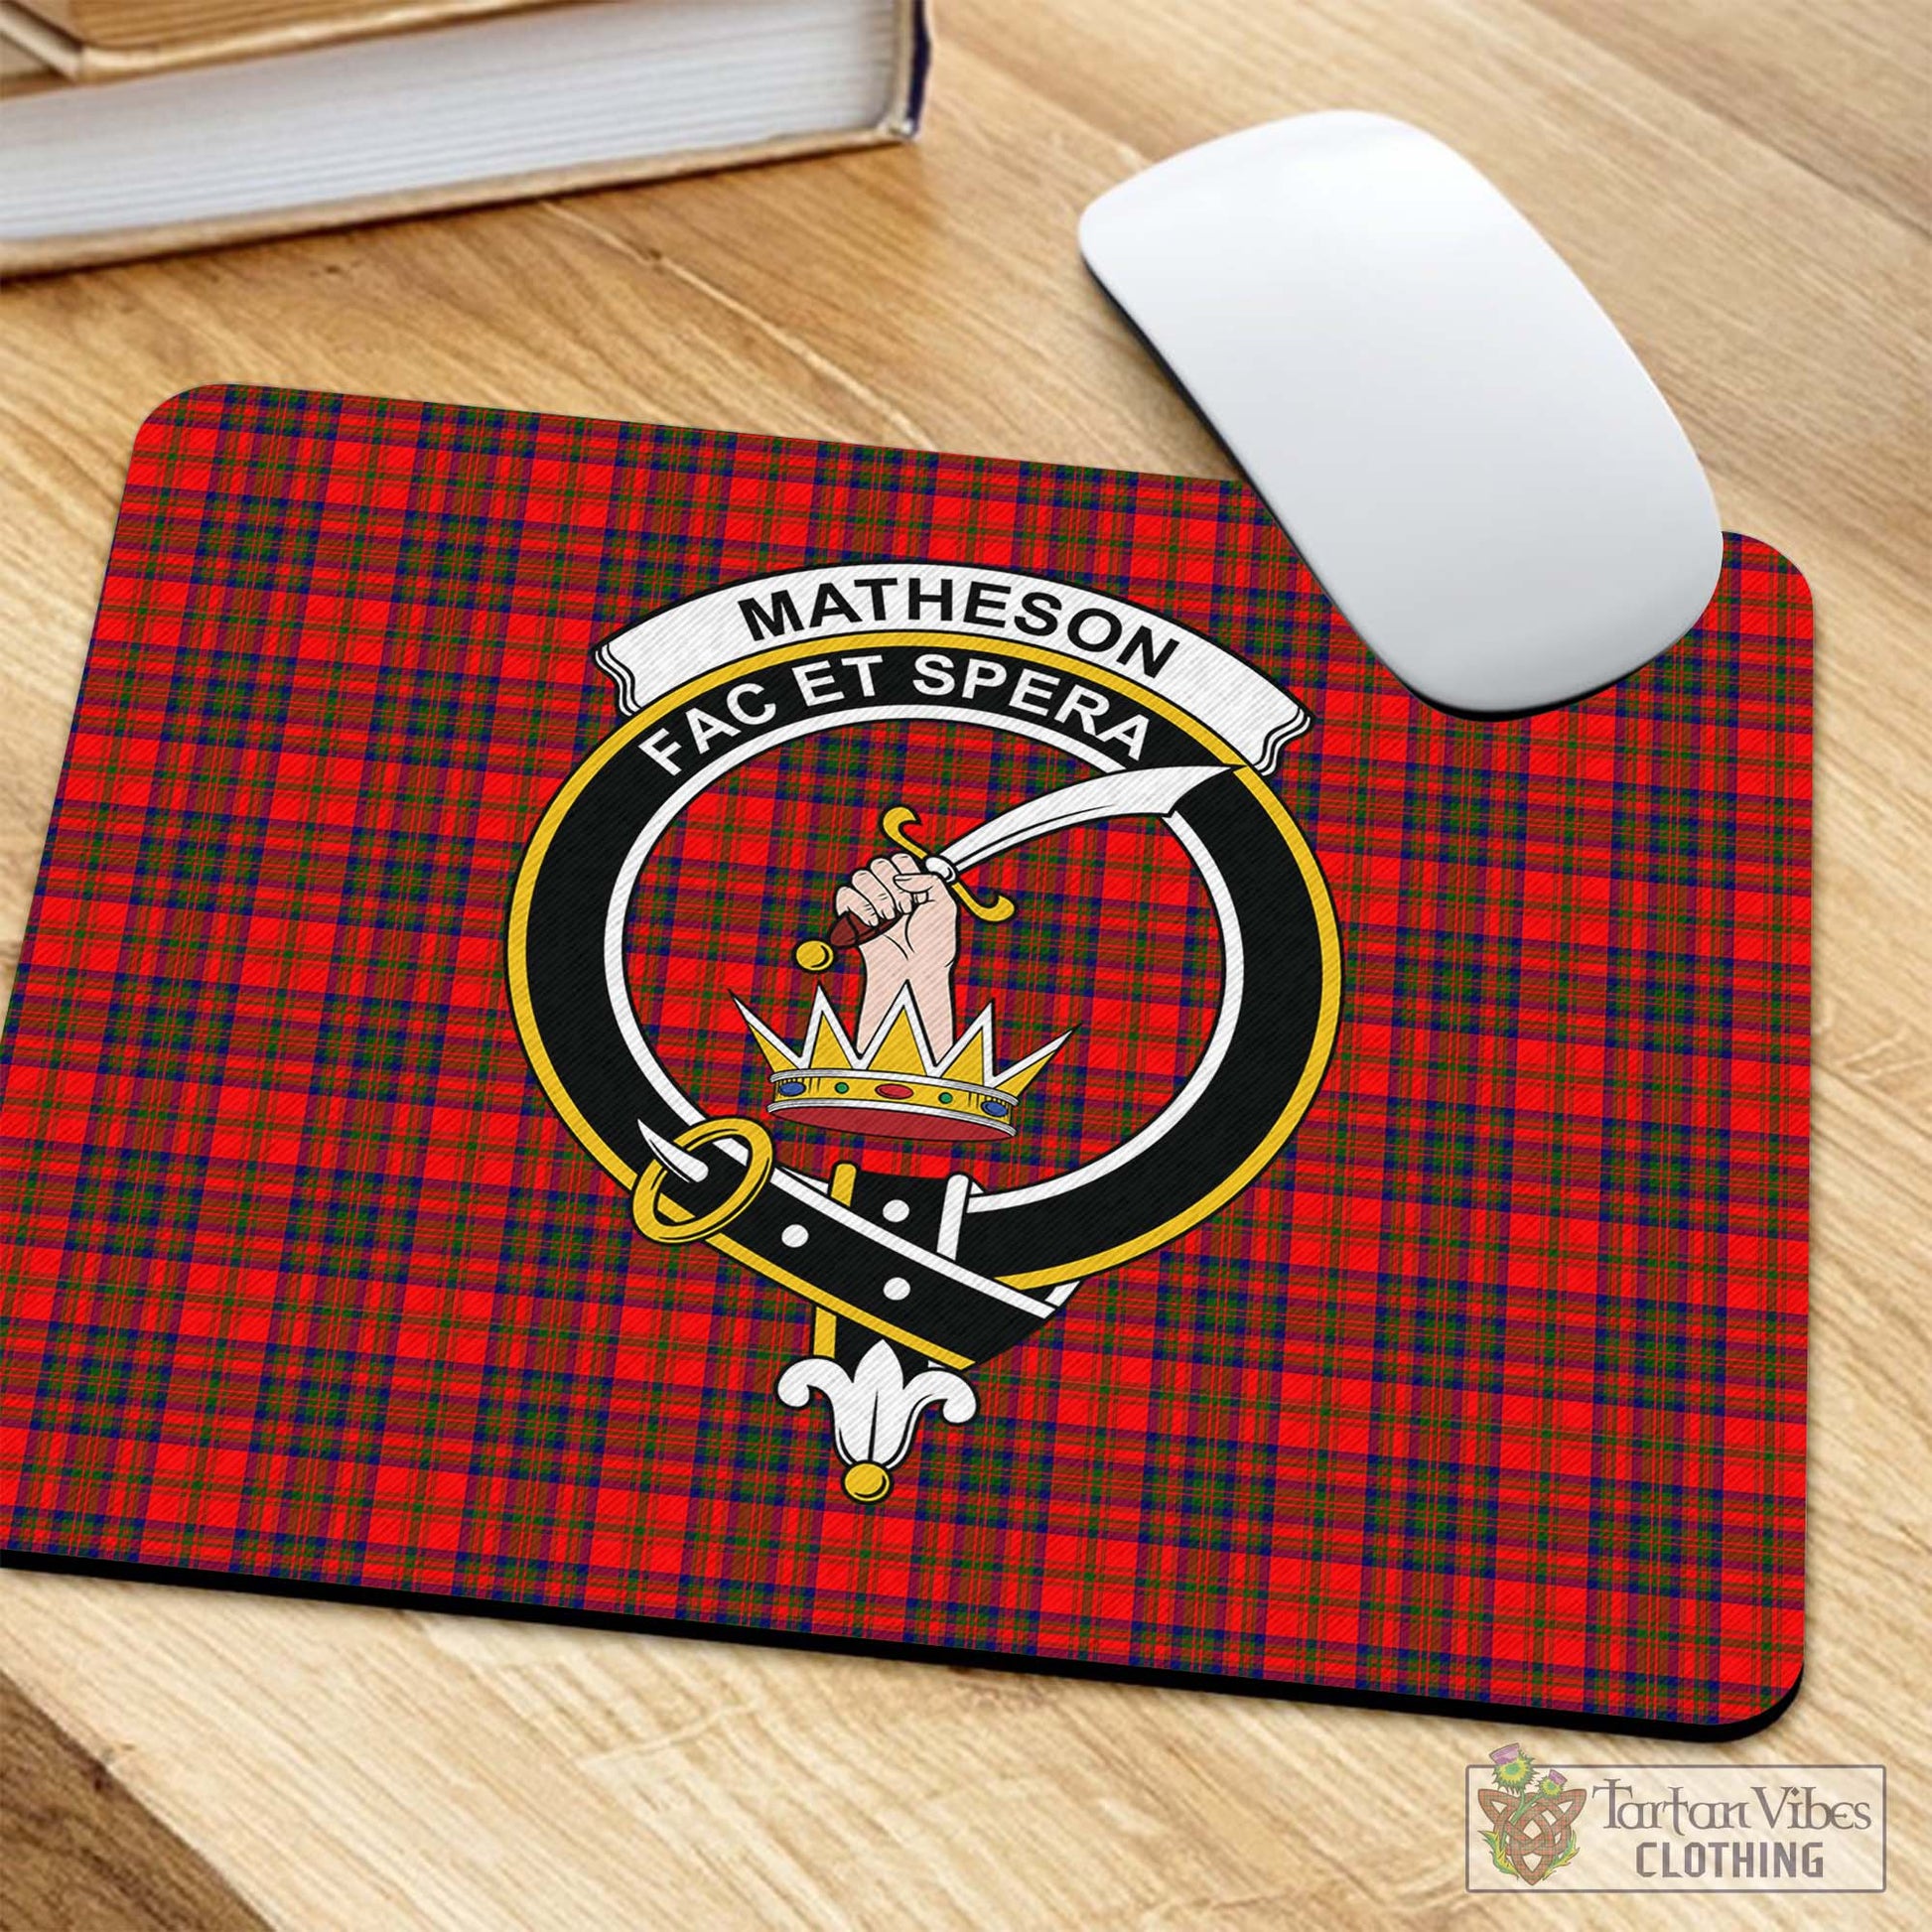 Tartan Vibes Clothing Matheson Modern Tartan Mouse Pad with Family Crest